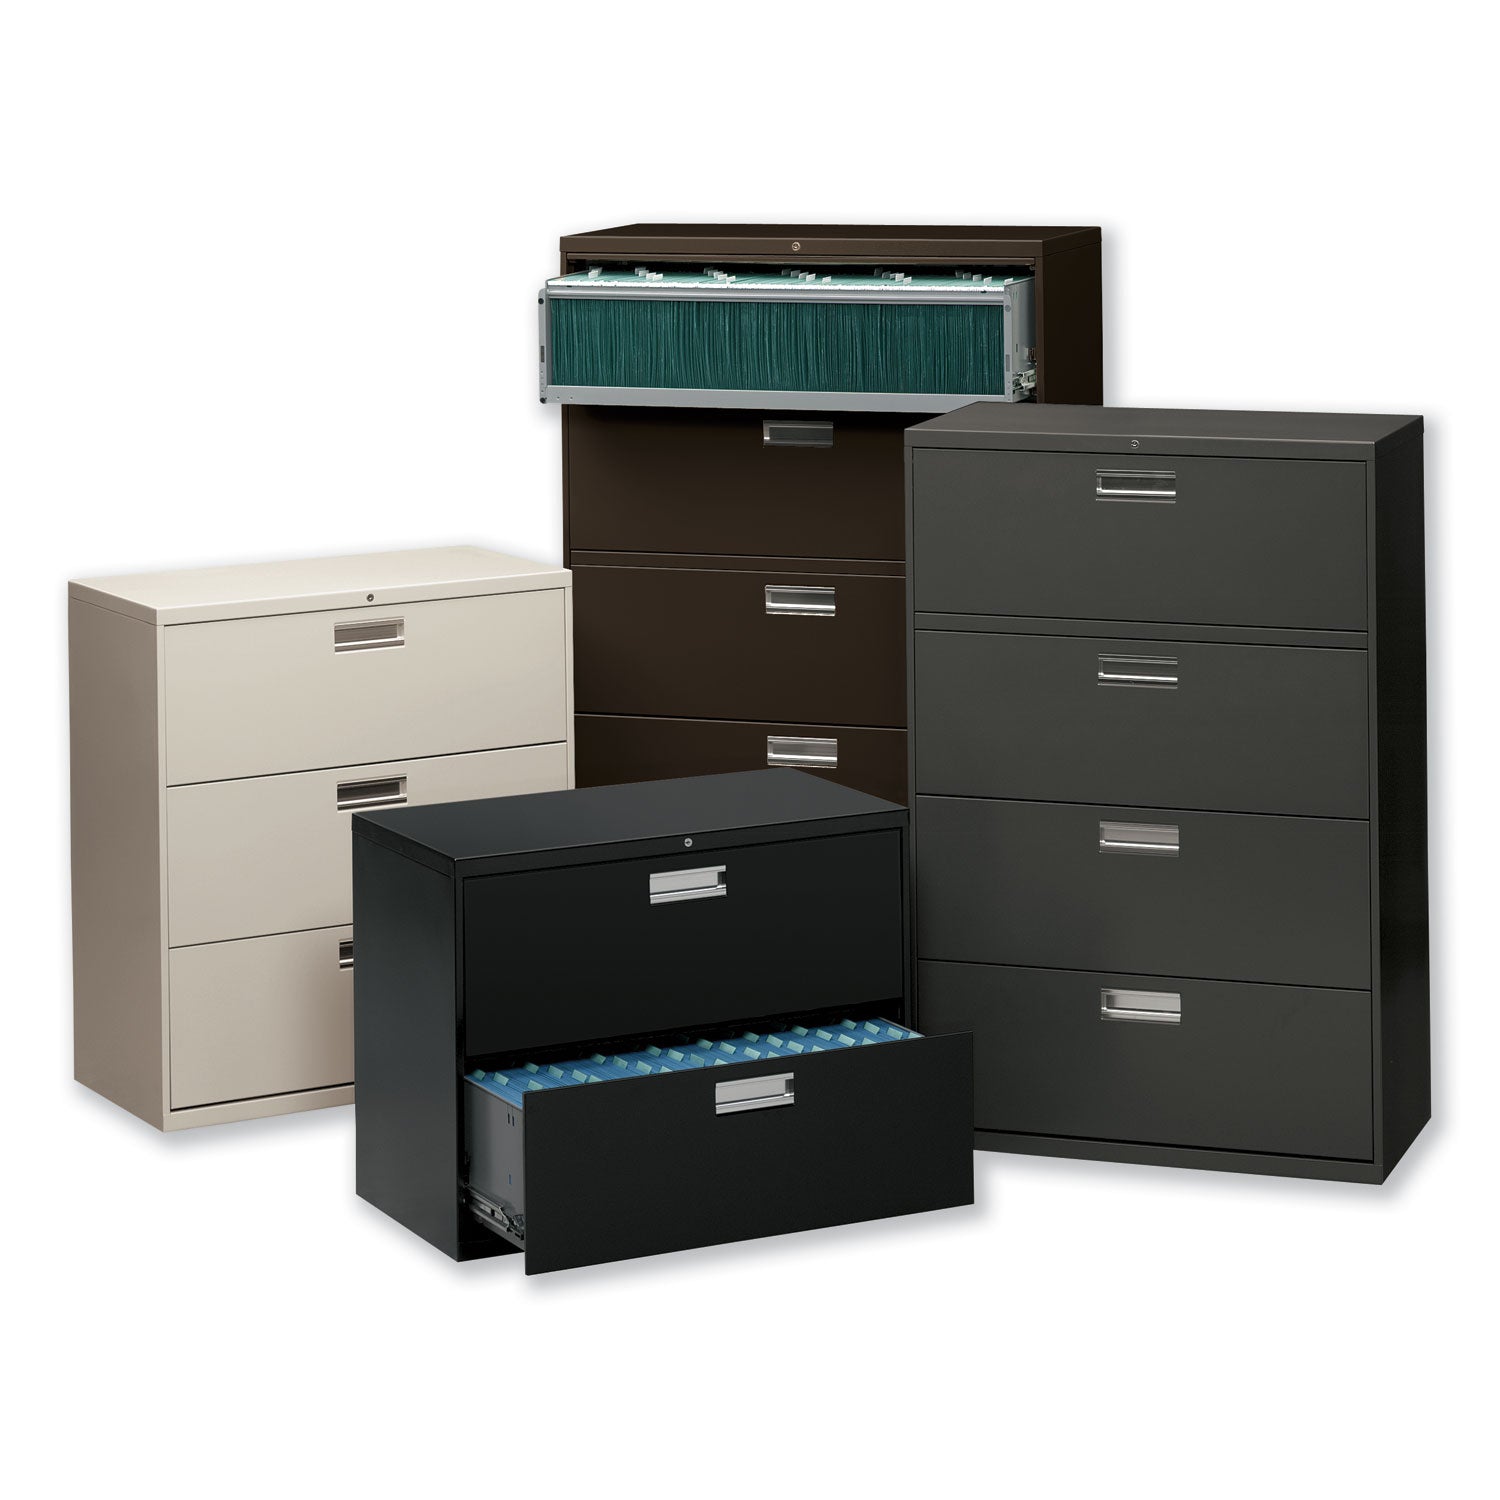 Brigade 600 Series Lateral File, 3 Legal/Letter-Size File Drawers, Light Gray, 36" x 18" x 39.13 - 